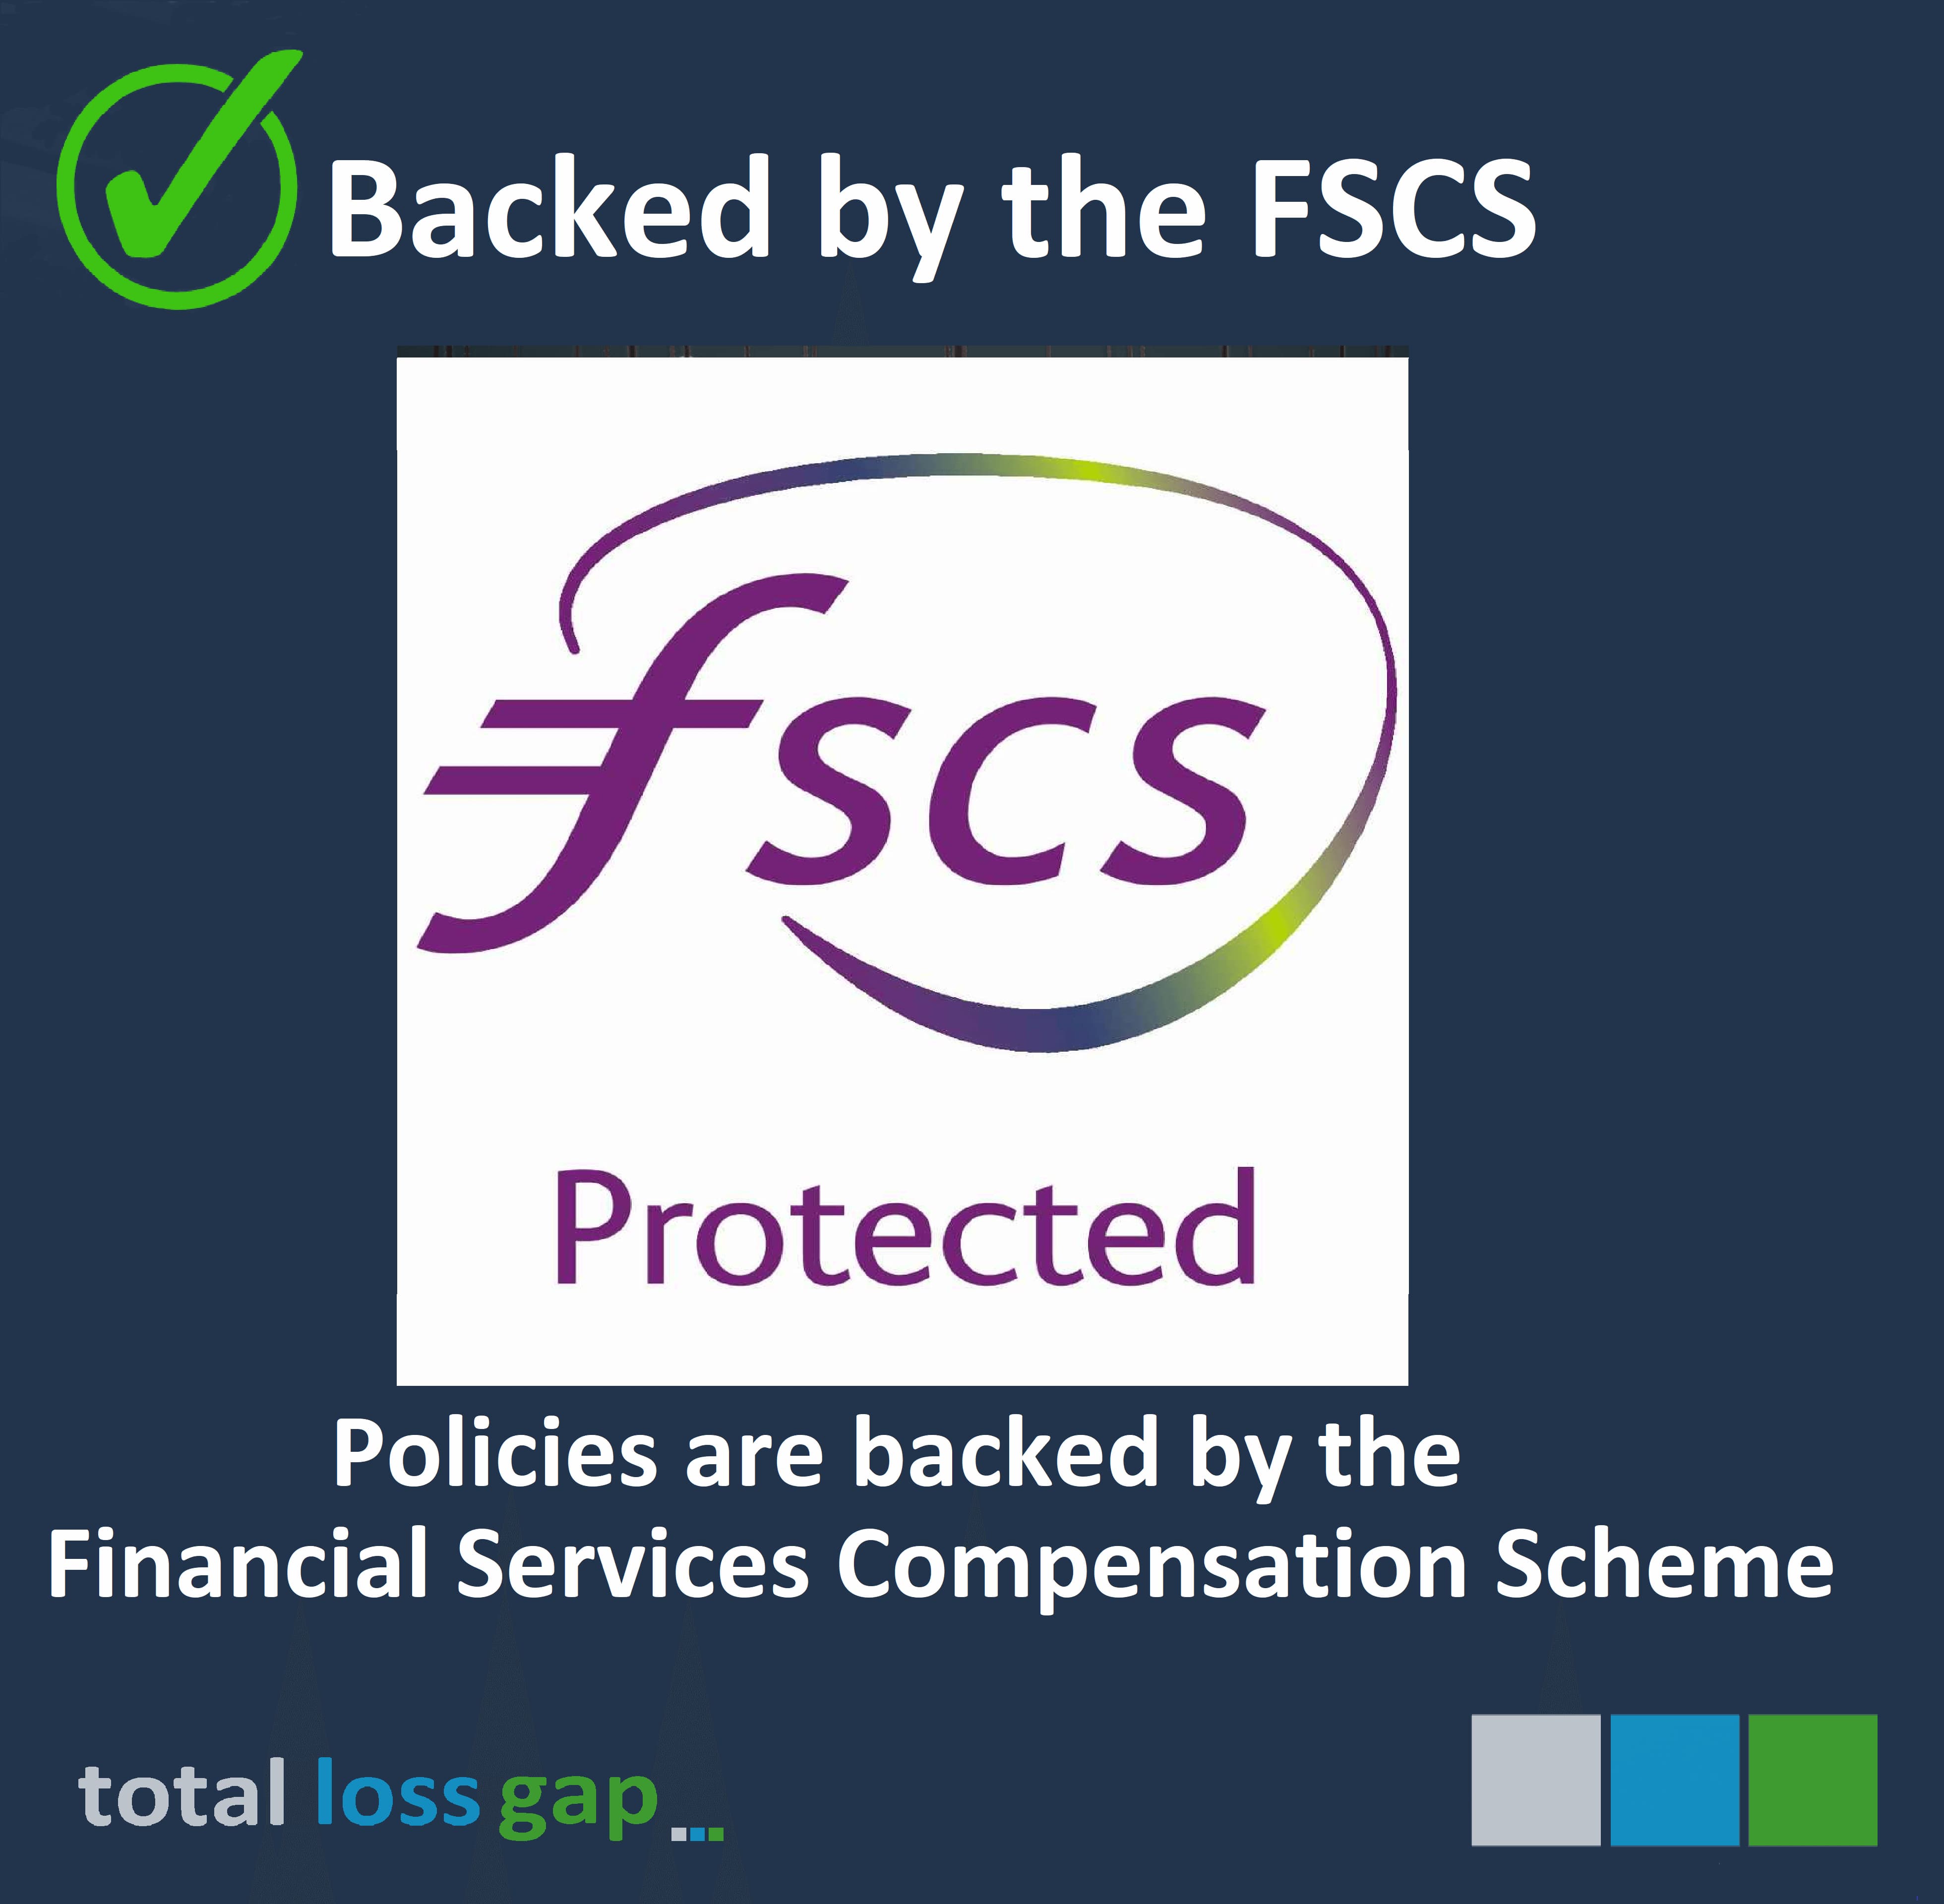 Your Return to Invoice Policy is backed by the FSCS